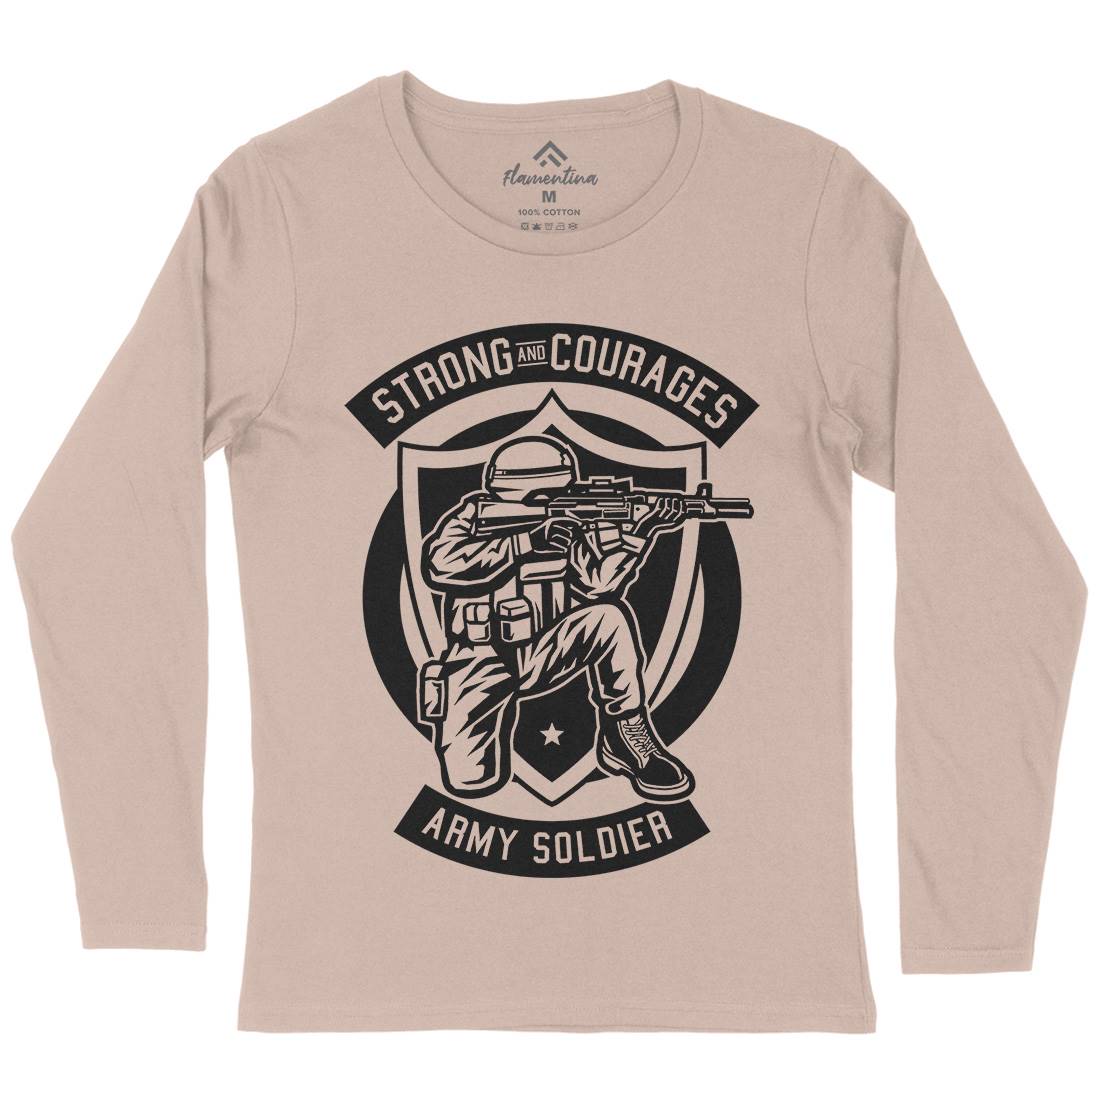 Army Soldier Womens Long Sleeve T-Shirt Army B483